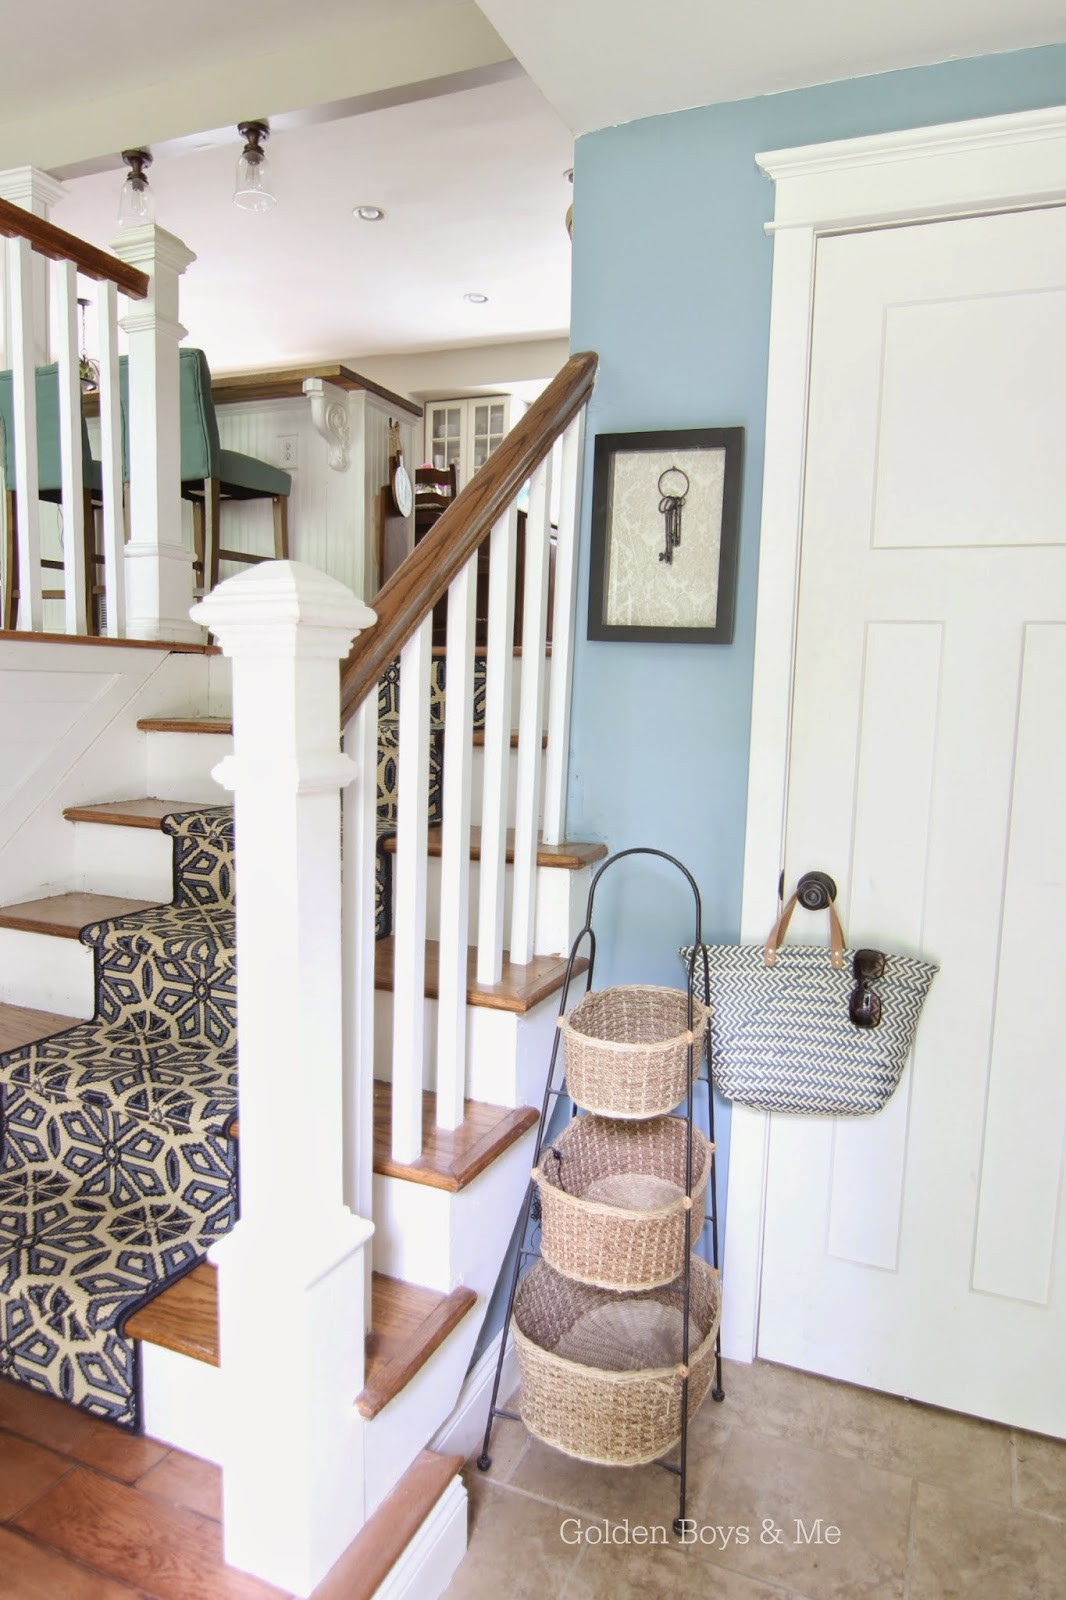 Best ideas about DIY Stair Runner
. Save or Pin Golden Boys and Me DIY Stair Runner Now.